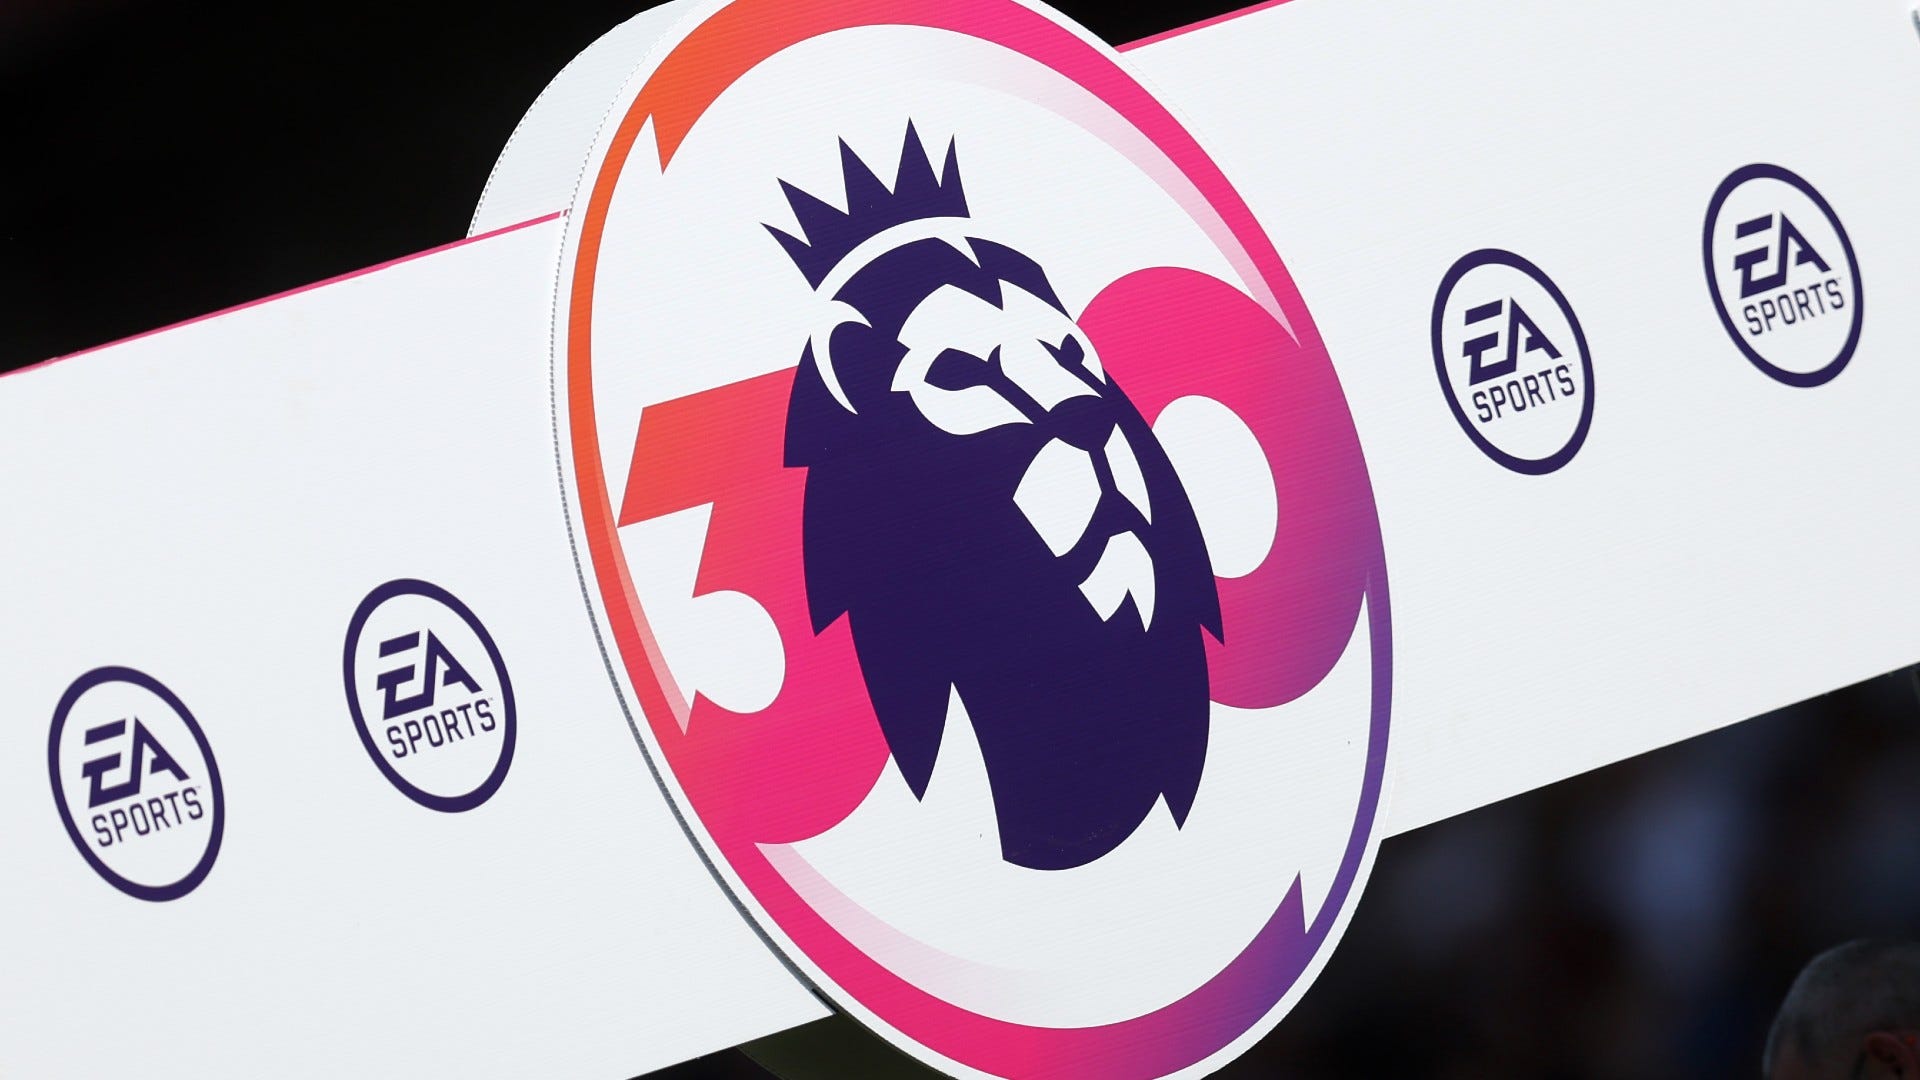 Premier League could ditch Sky Sports and BT Sport for in-house streaming in HUGE change to broadcasting Goal US